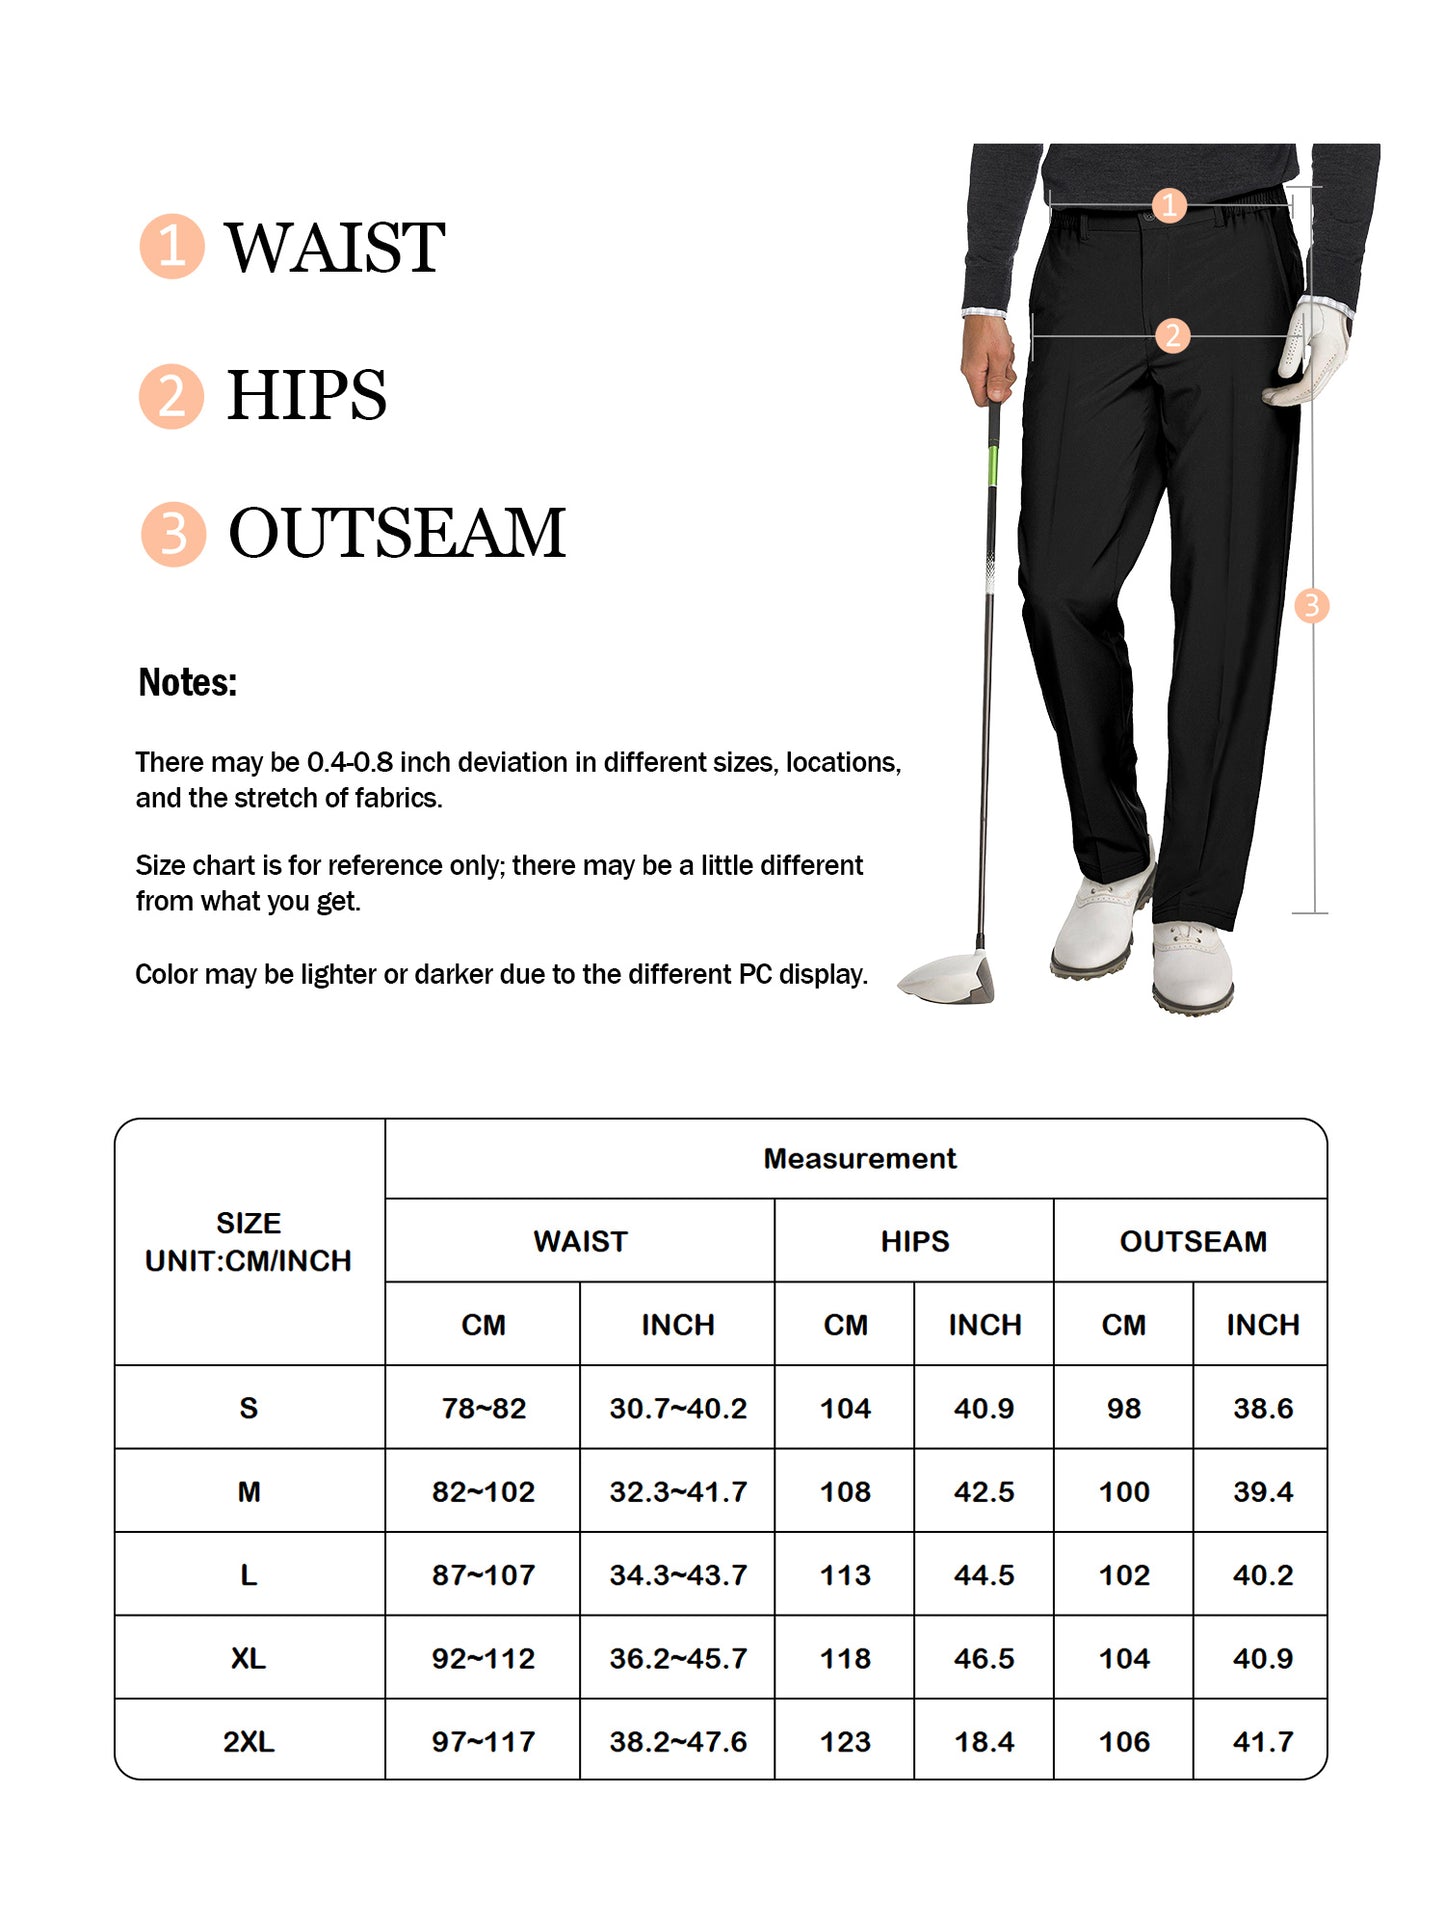 Comdecevis Men's Golf Pants Stretchy Sweatpants Work Travel Dress Tech Pants Casual Joggers Belt Loops with 5 Pockets